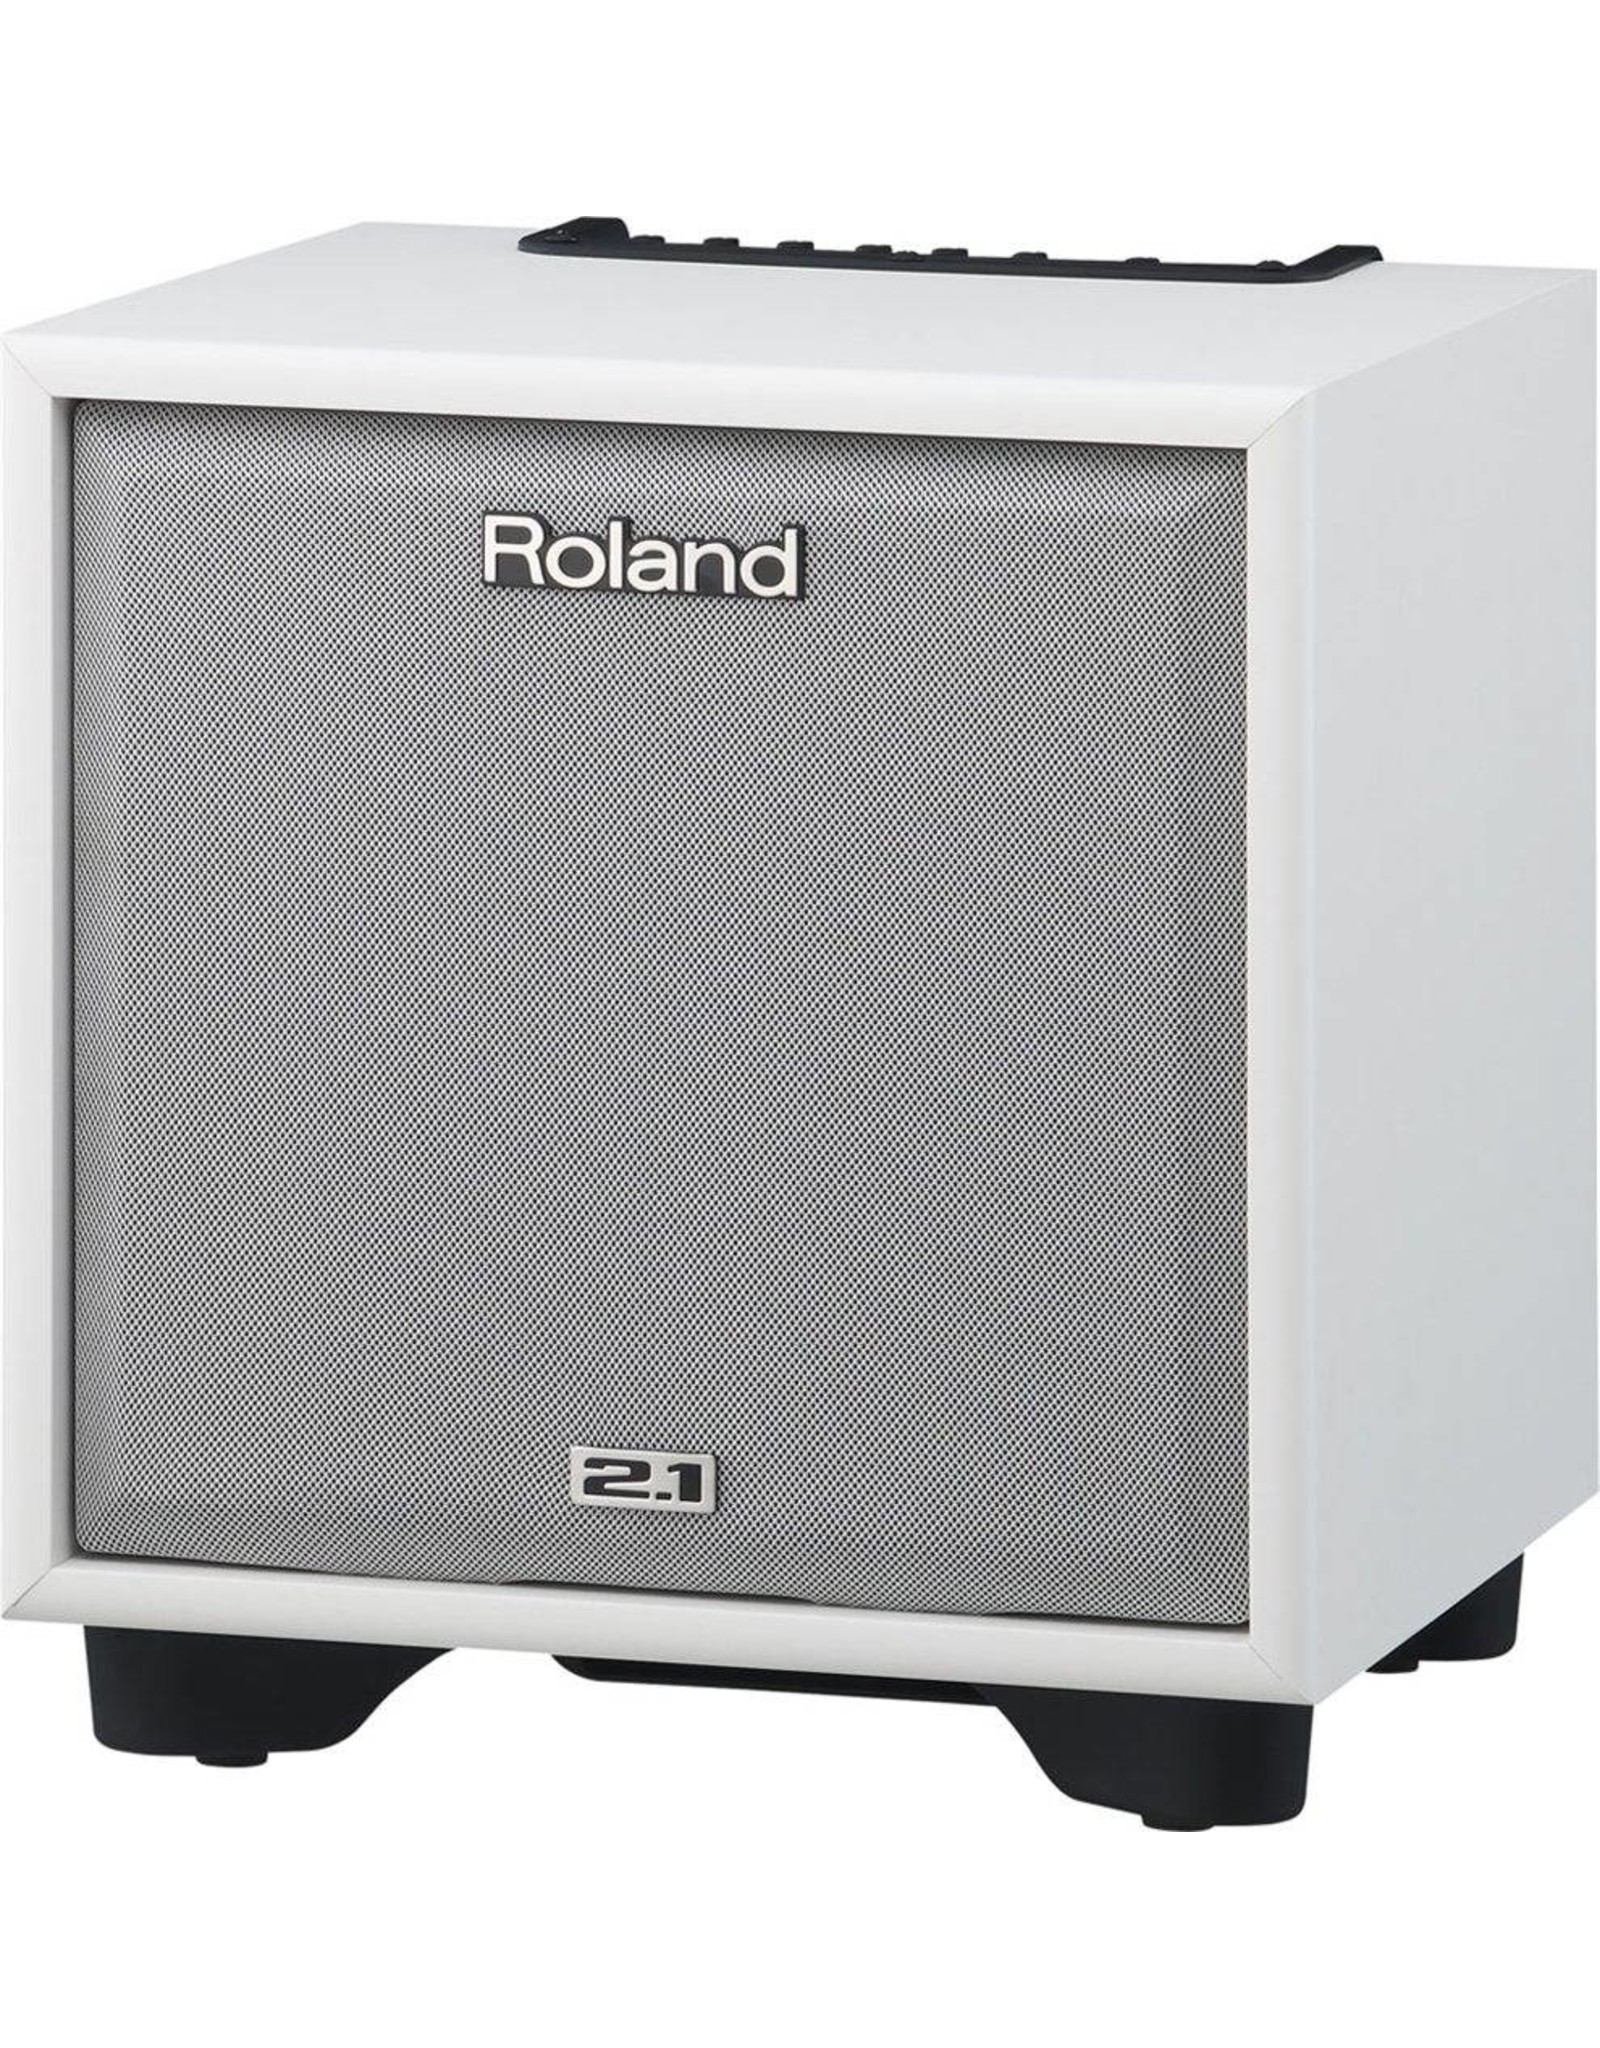 Roland CM-110 CUBE Monitor 2.1-System - Weiß B Lager